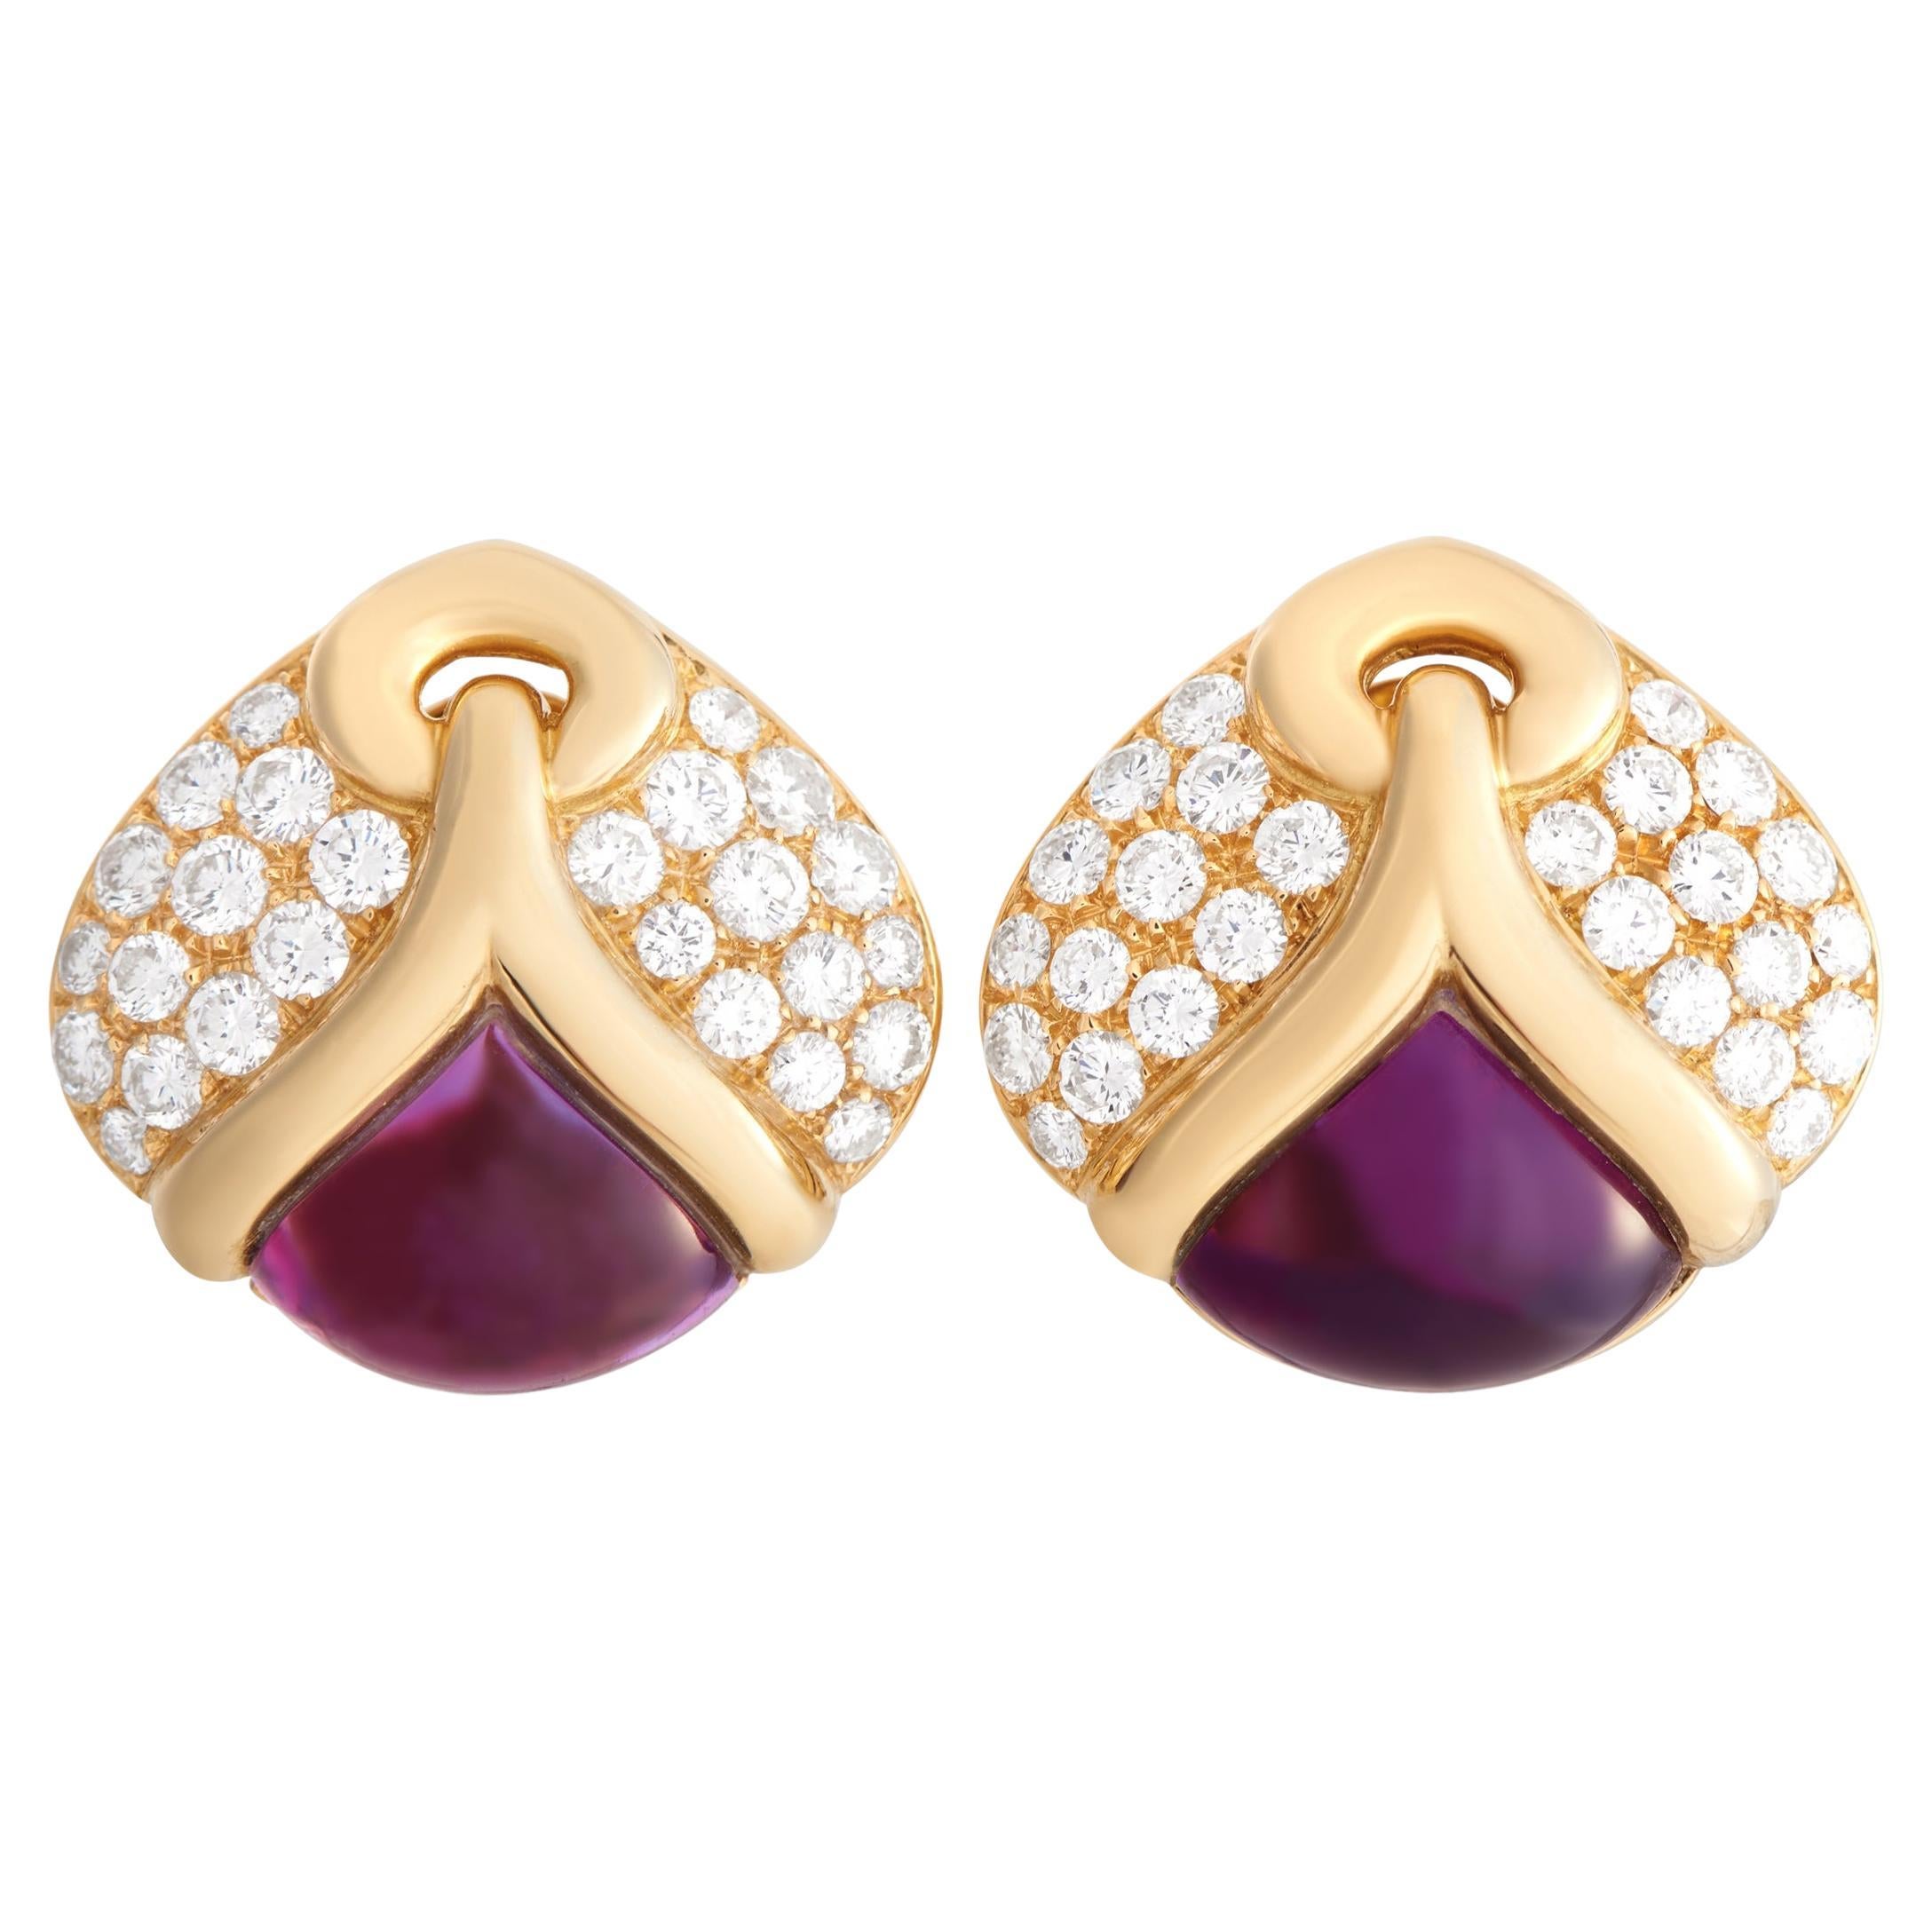 Bvlgari 18K Yellow Gold 4.00 Ct Diamond and Amethyst Clip-on Earrings For Sale